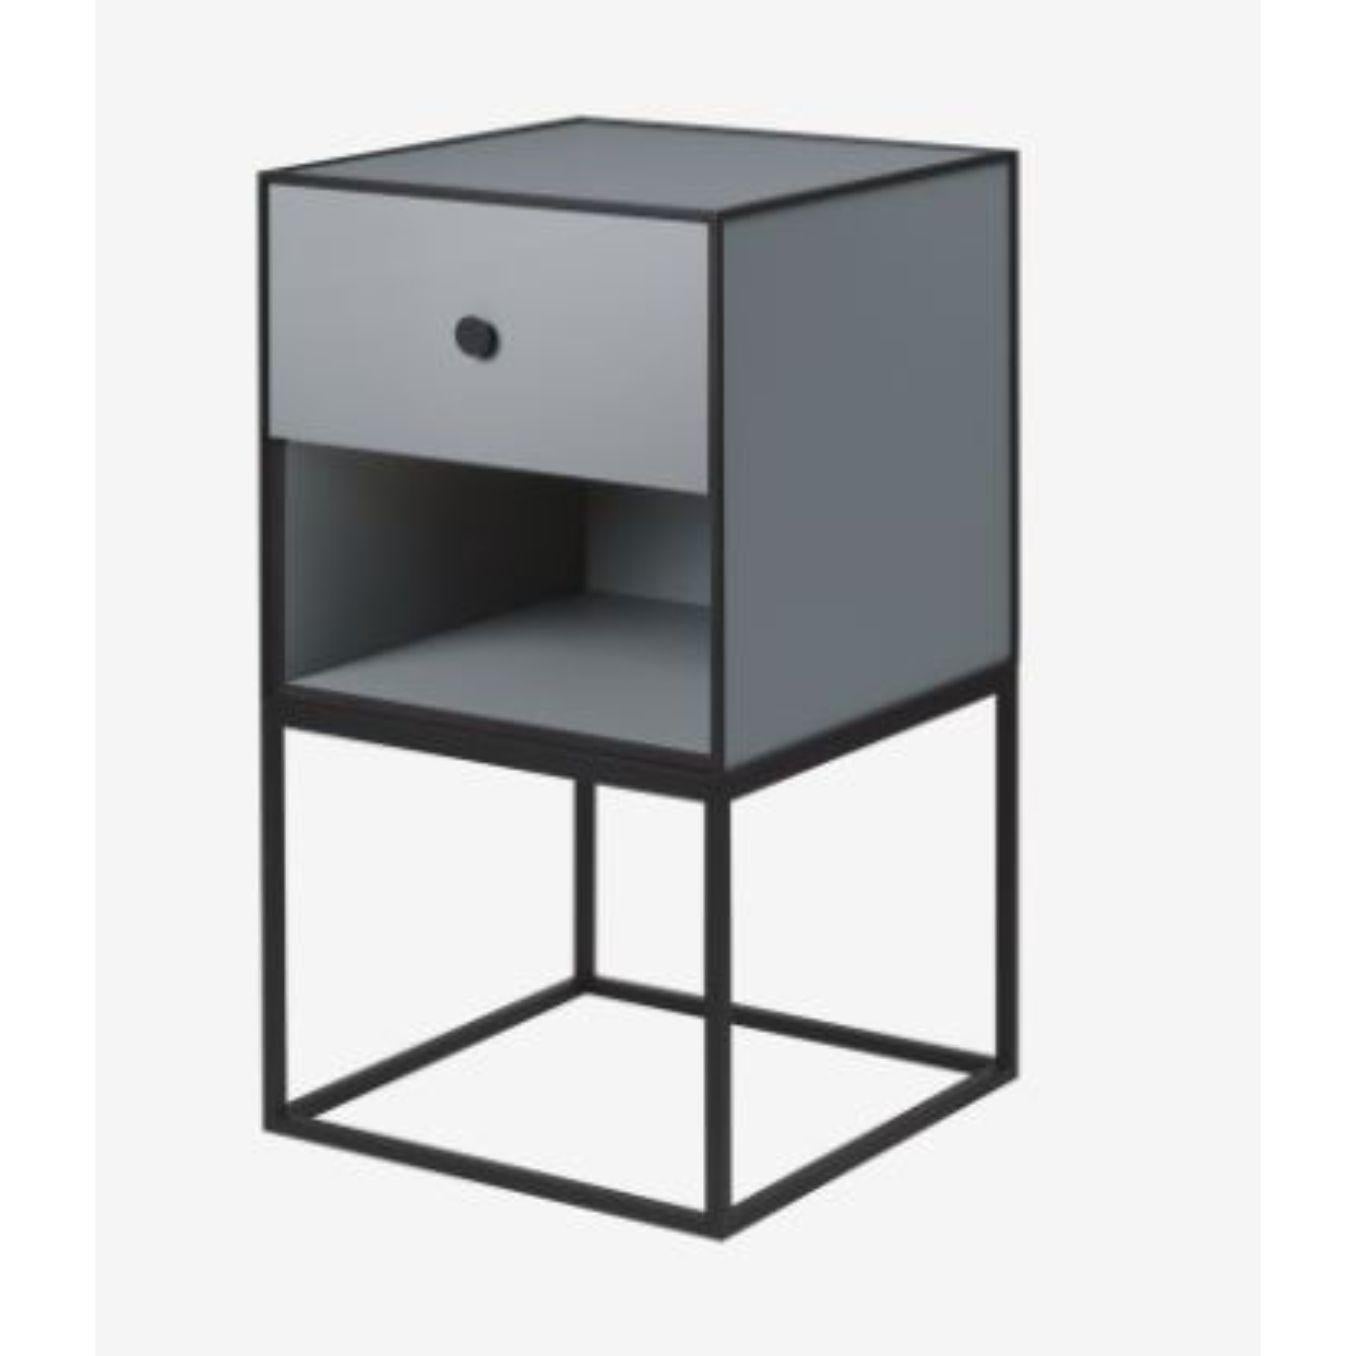 35 dark grey frame sideboard with 1 drawer by Lassen
Dimensions: W 35 x D 35 x H 63 cm 
Materials: Finér, melamin, melamin, melamine, metal, veneer
Also available in different colours and dimensions. 
Weight: 15.50 kg

By Lassen is a Danish